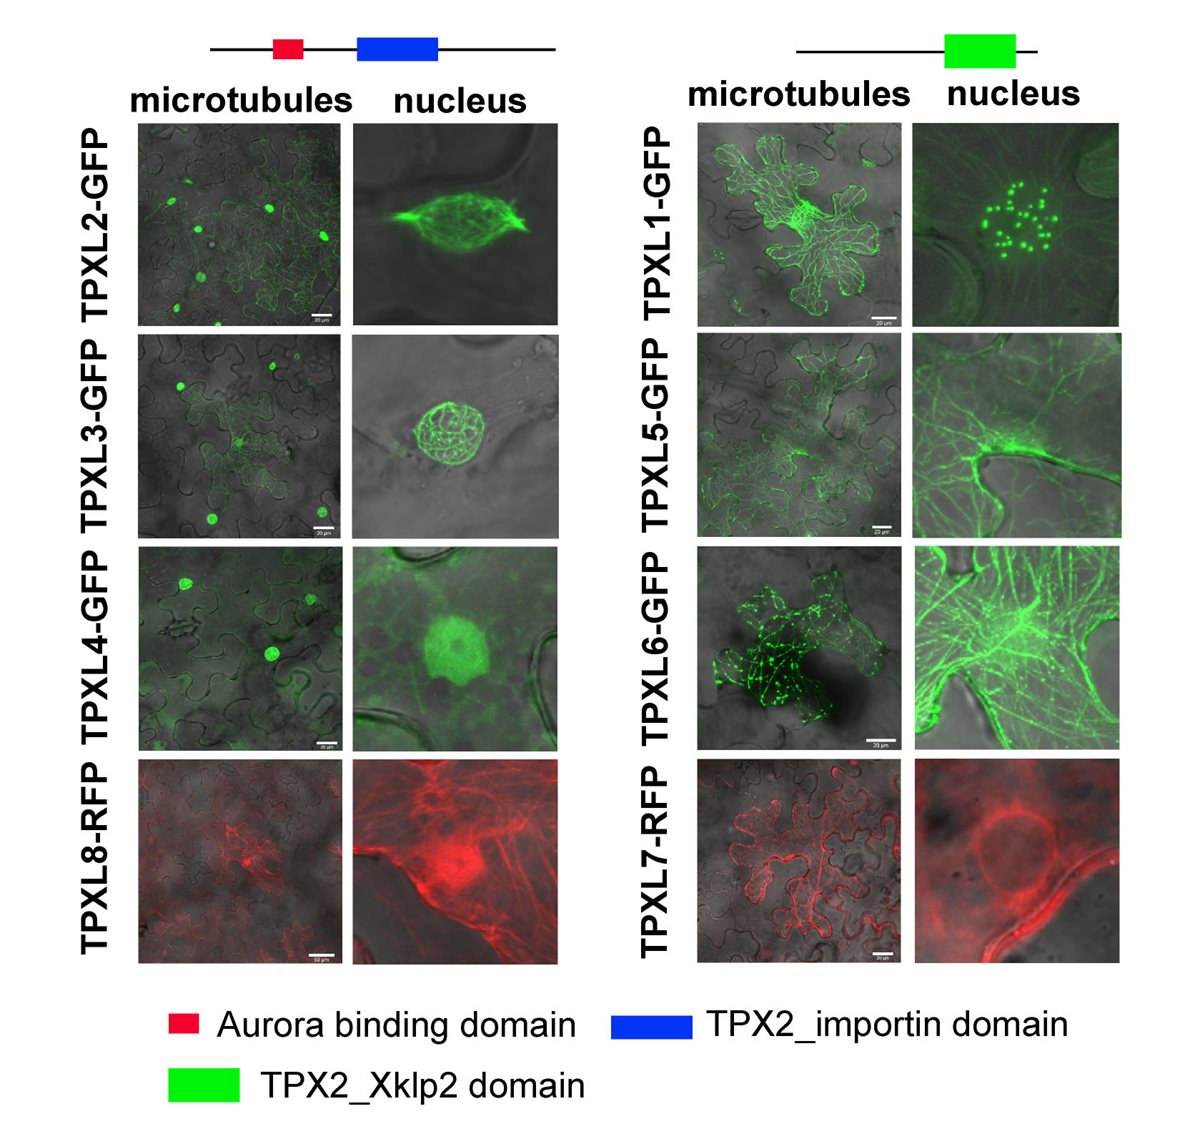 New publication: Functional divergence of microtubule-associated TPX2 family members in Arabidopsis thaliana